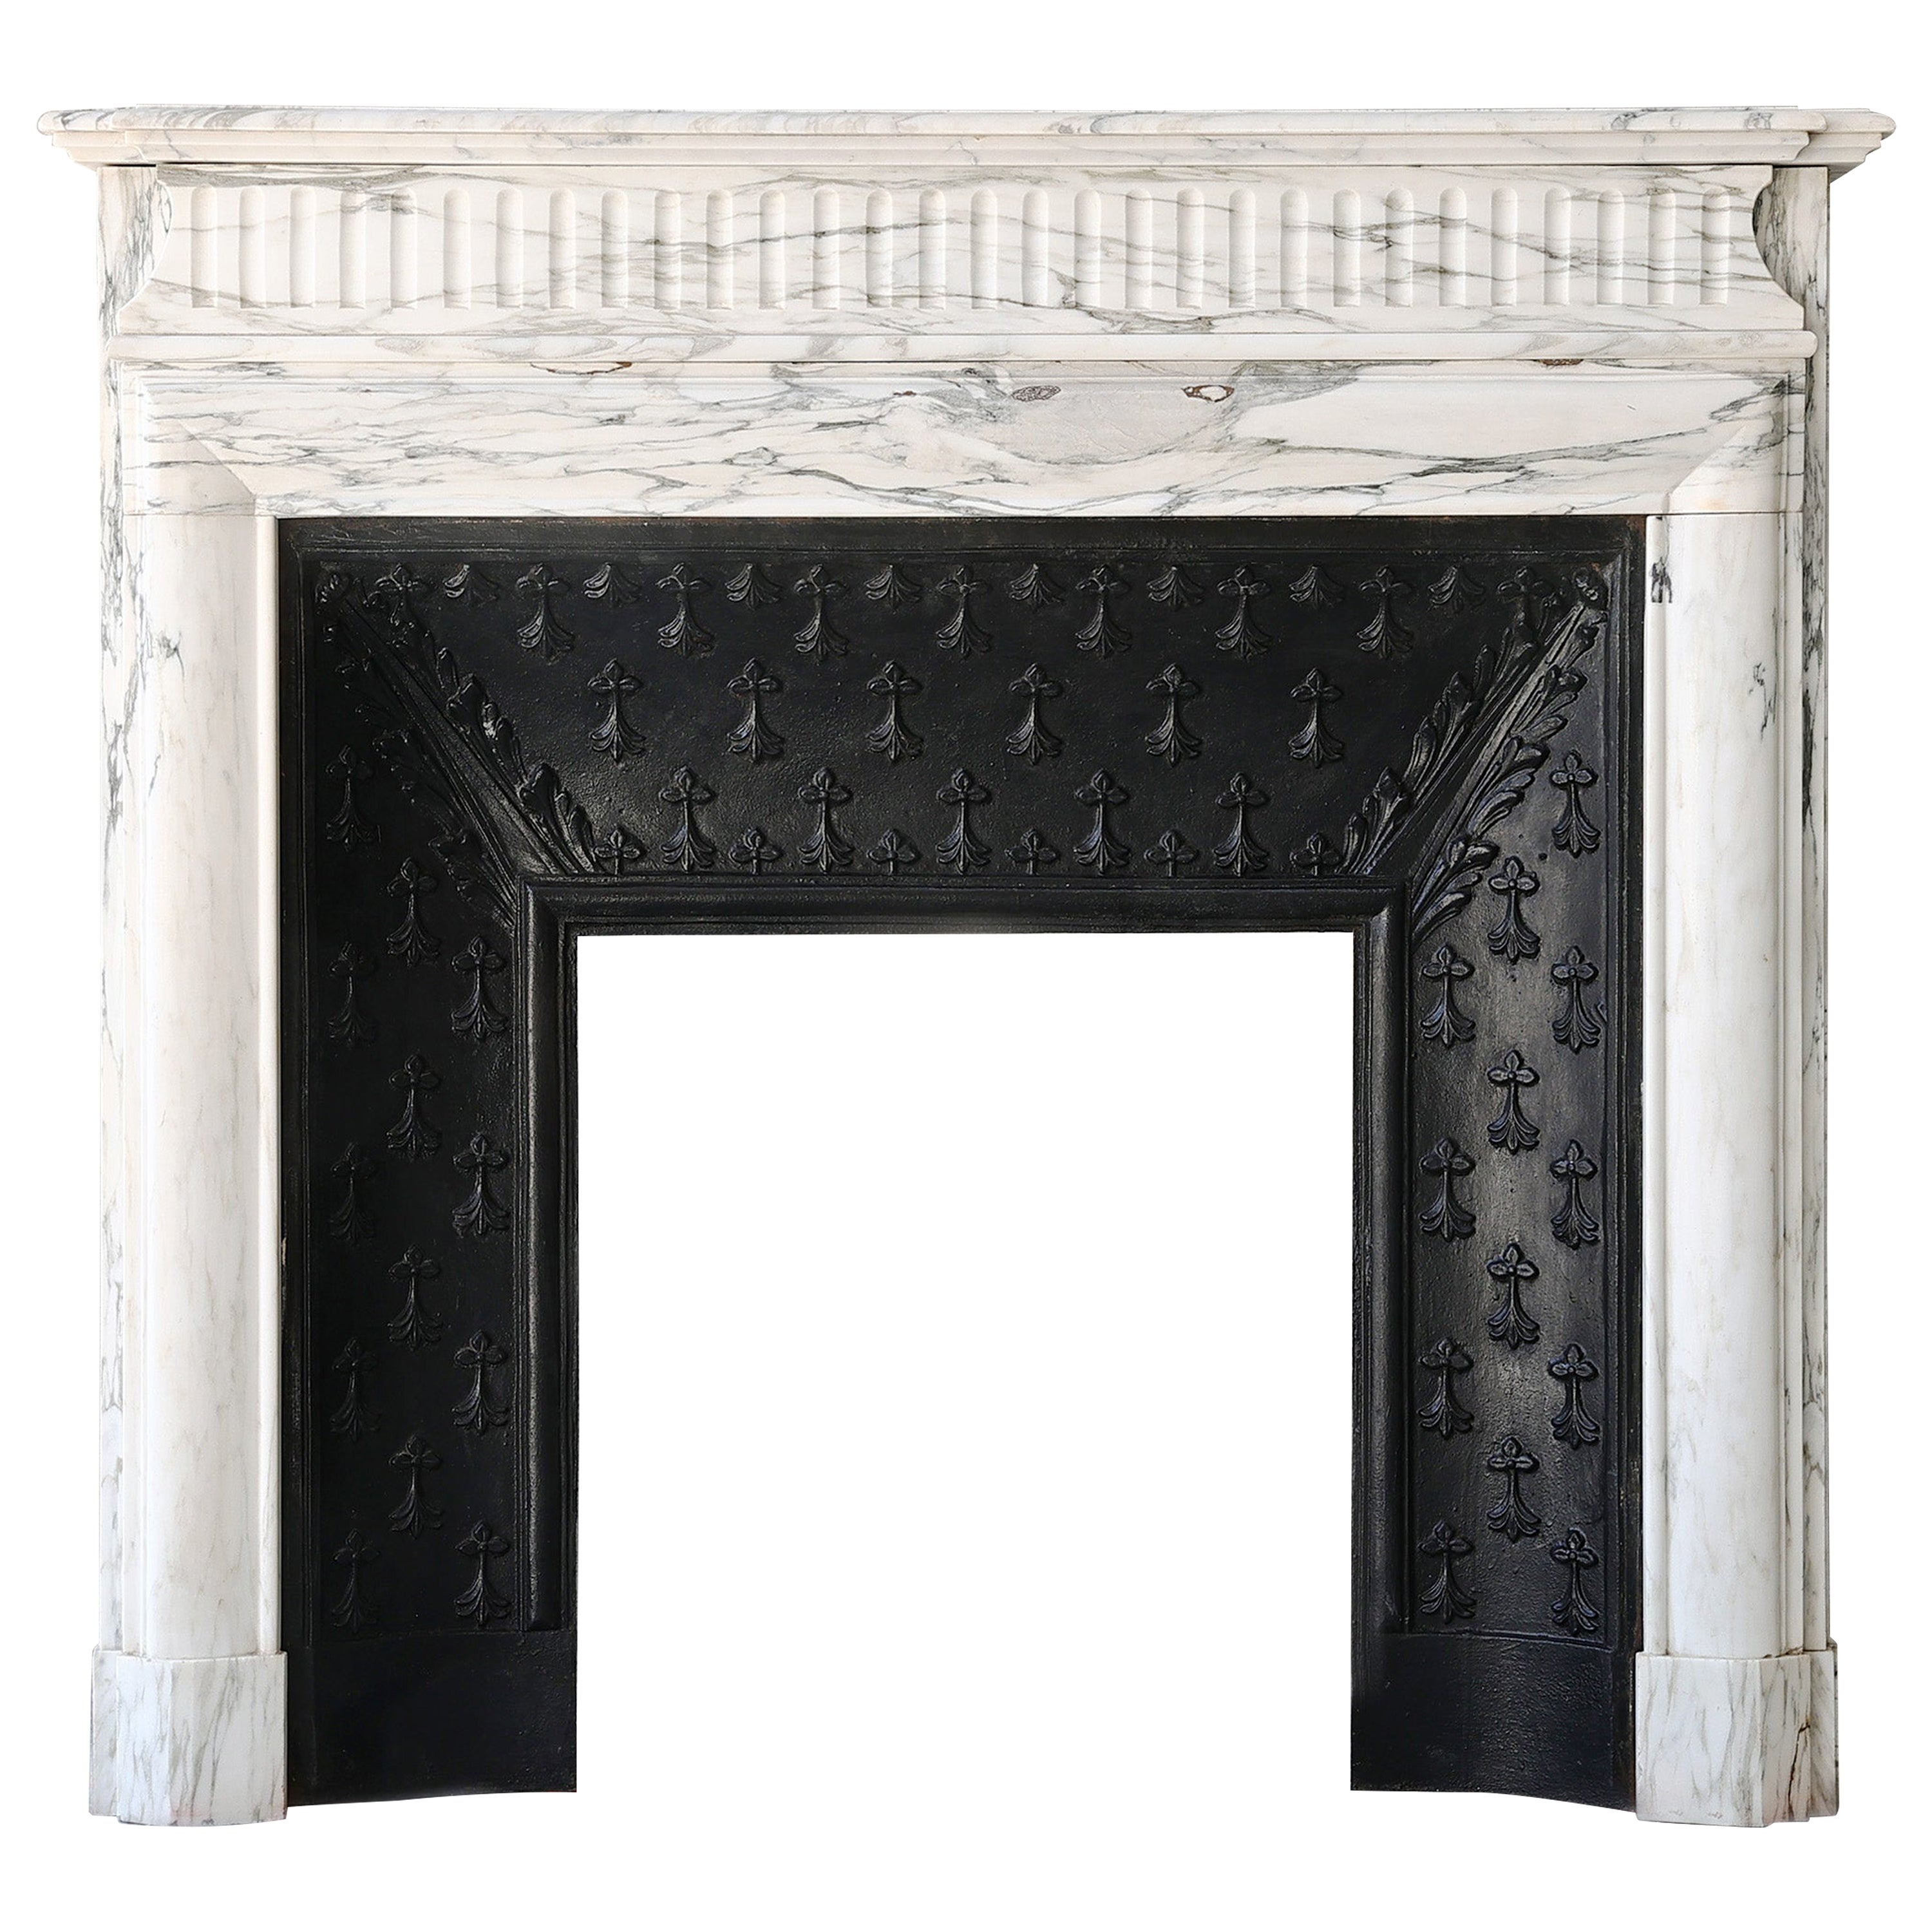 Carrara marble fireplace from the 19th century in style of Louis XIV